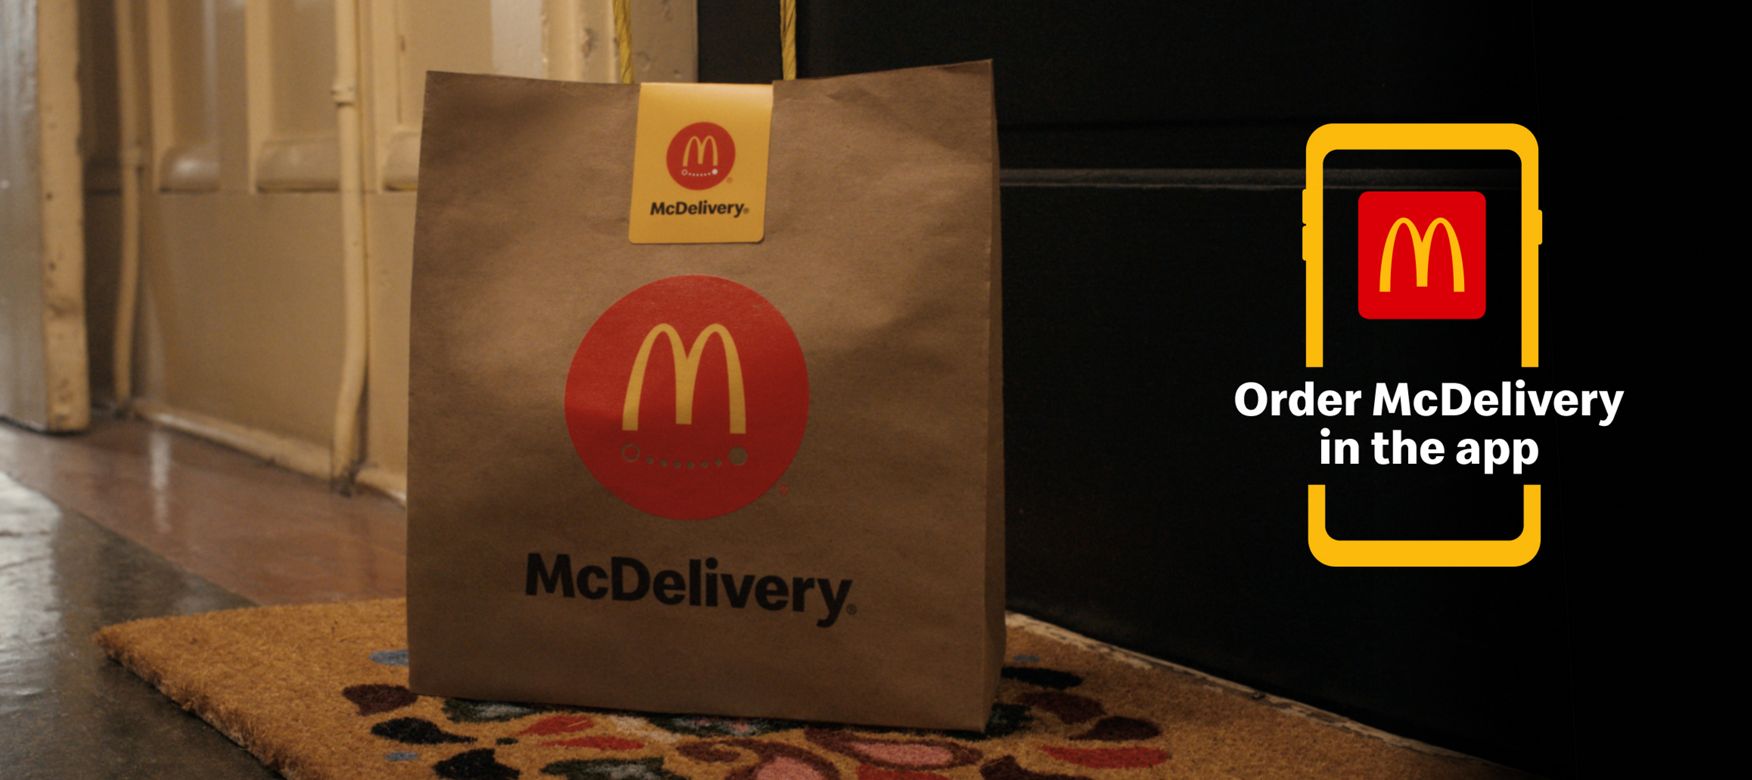 for McDelivery® brought to your doorstep, order McDelivery in the app